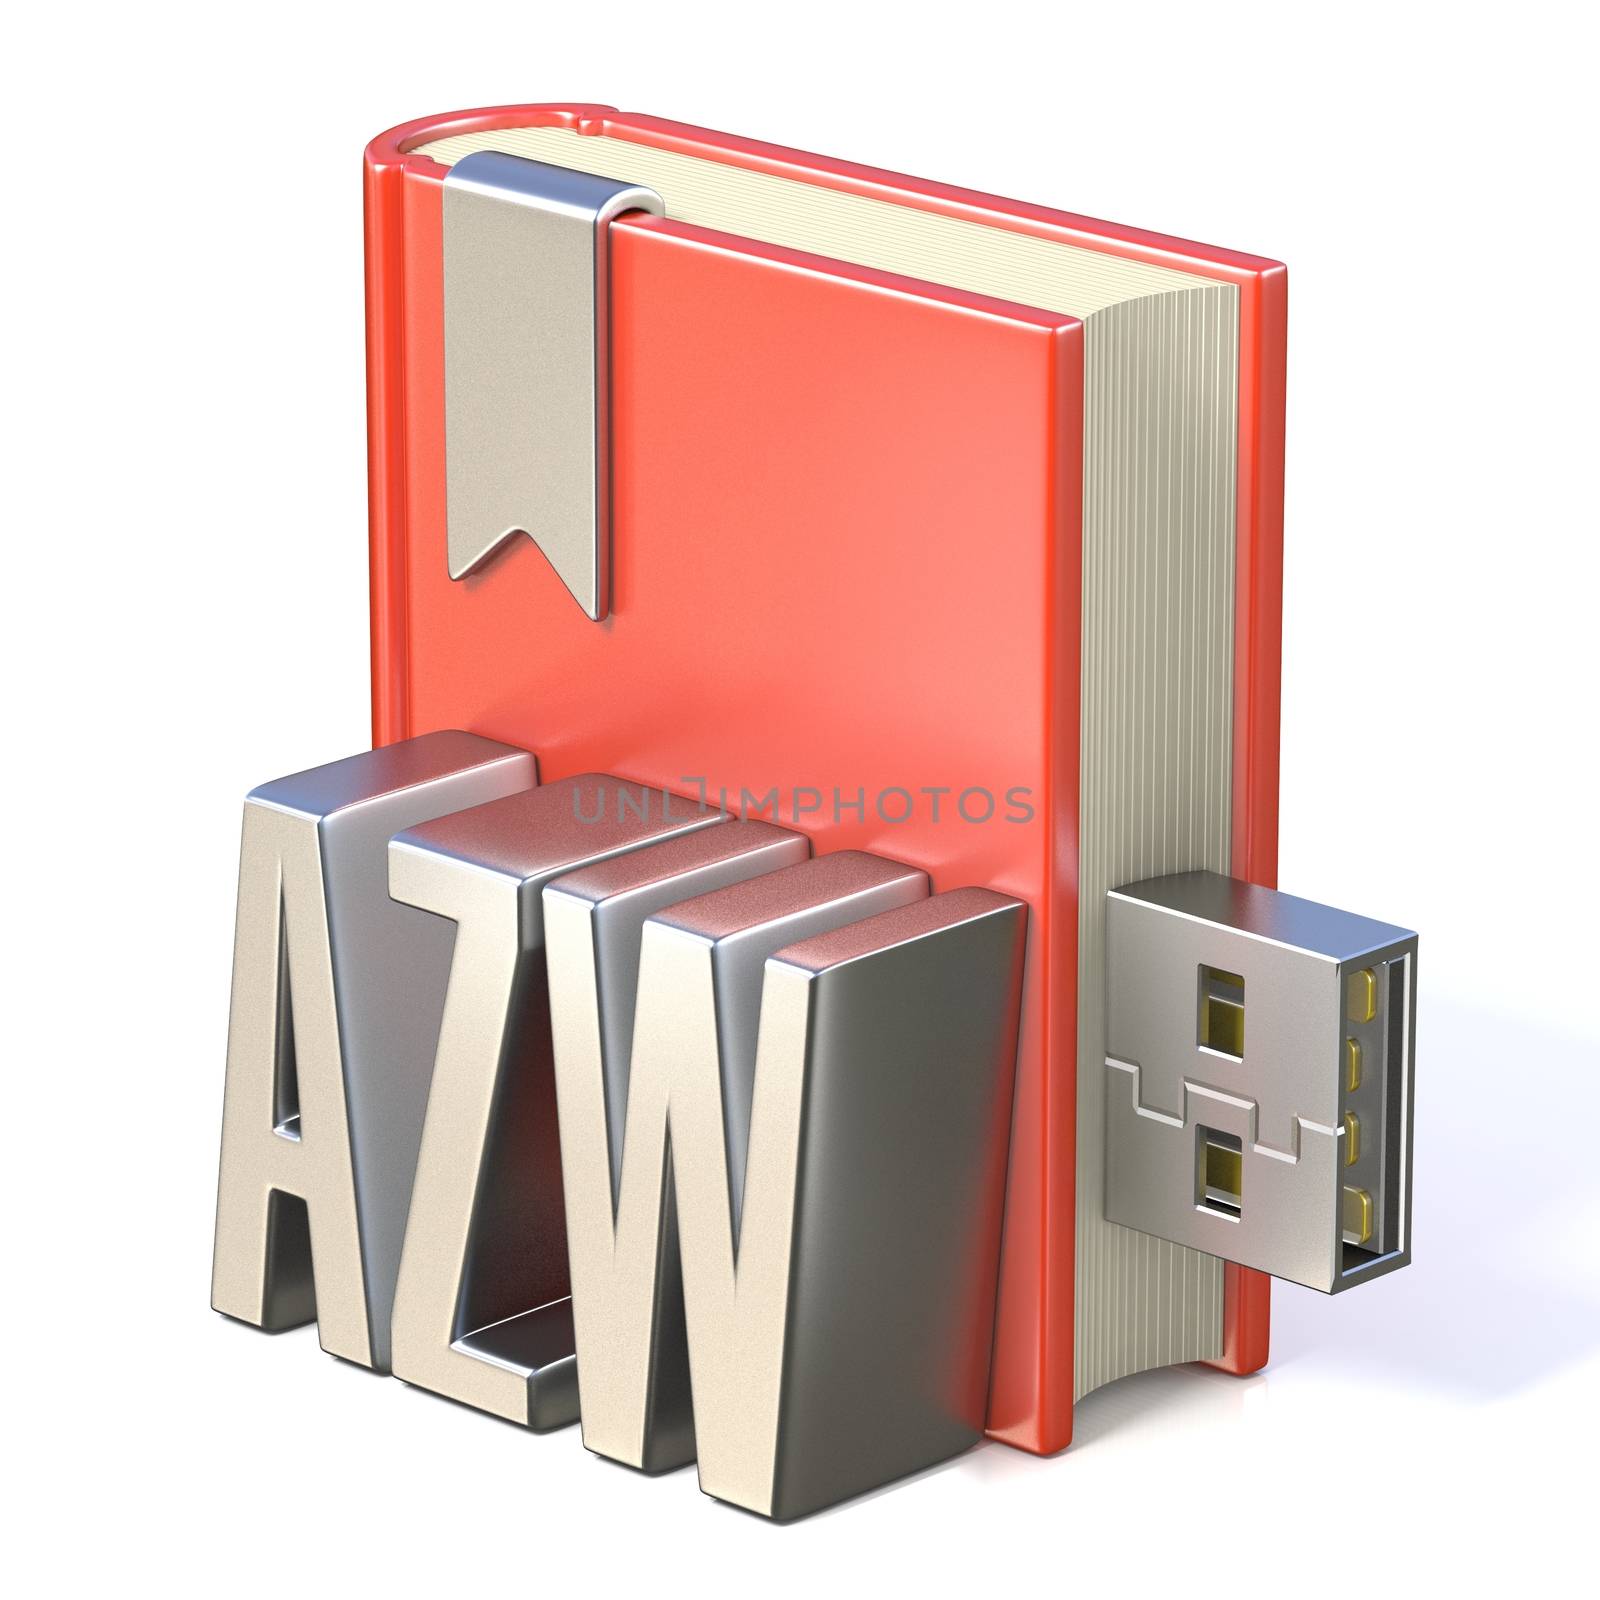 eBook icon metal AZW red book USB 3D render illustration isolated on white background